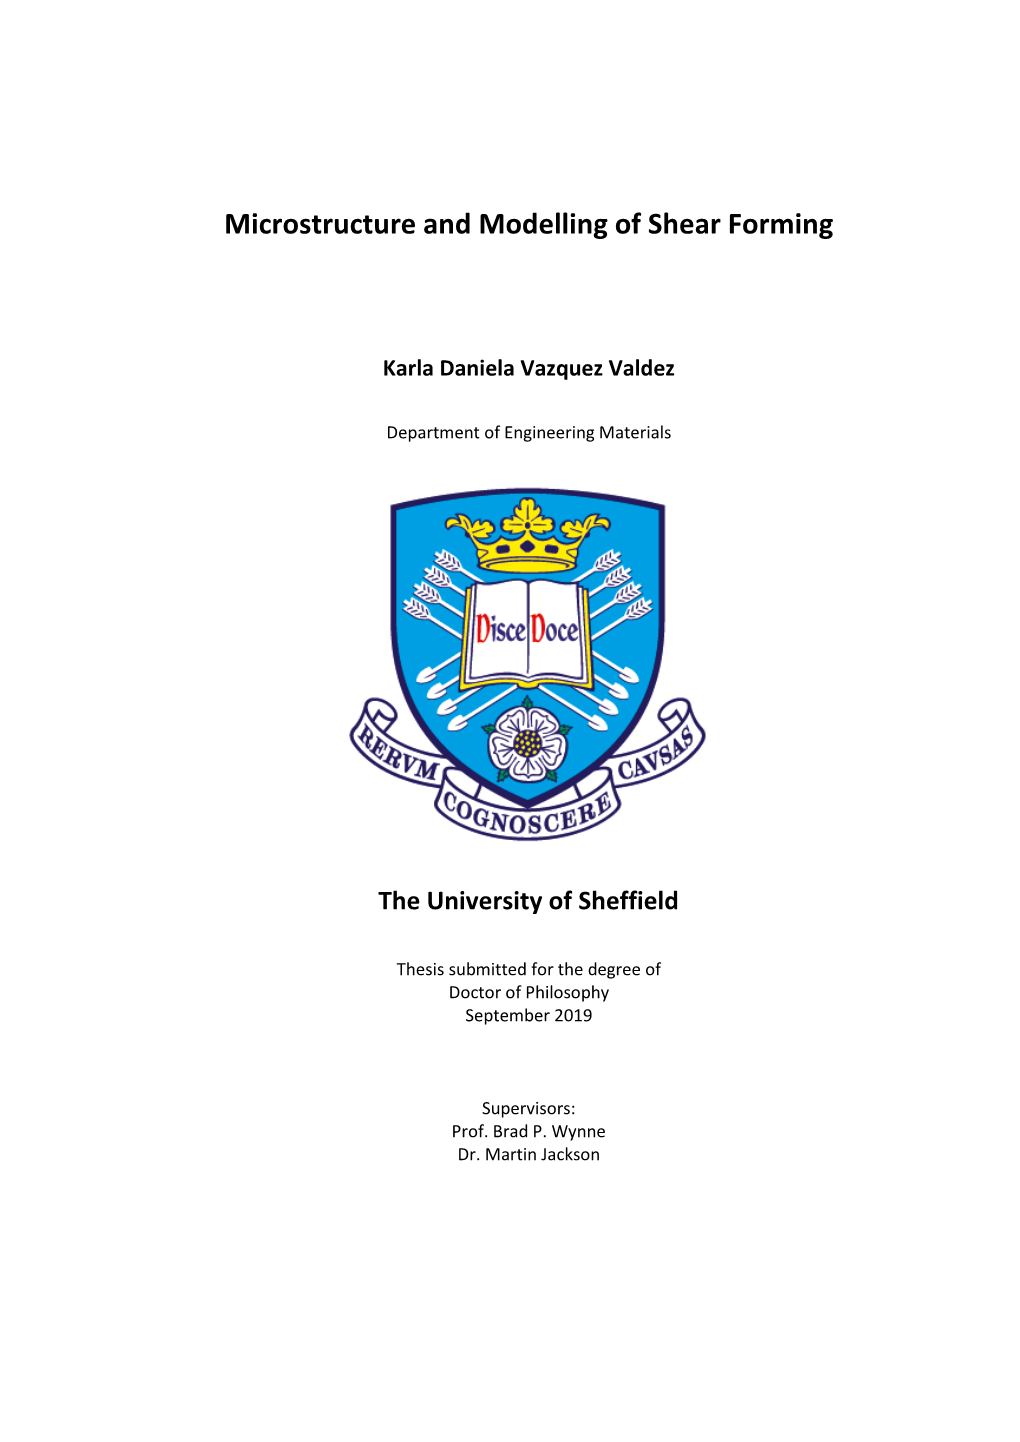 Microstructure and Modelling of Shear Forming